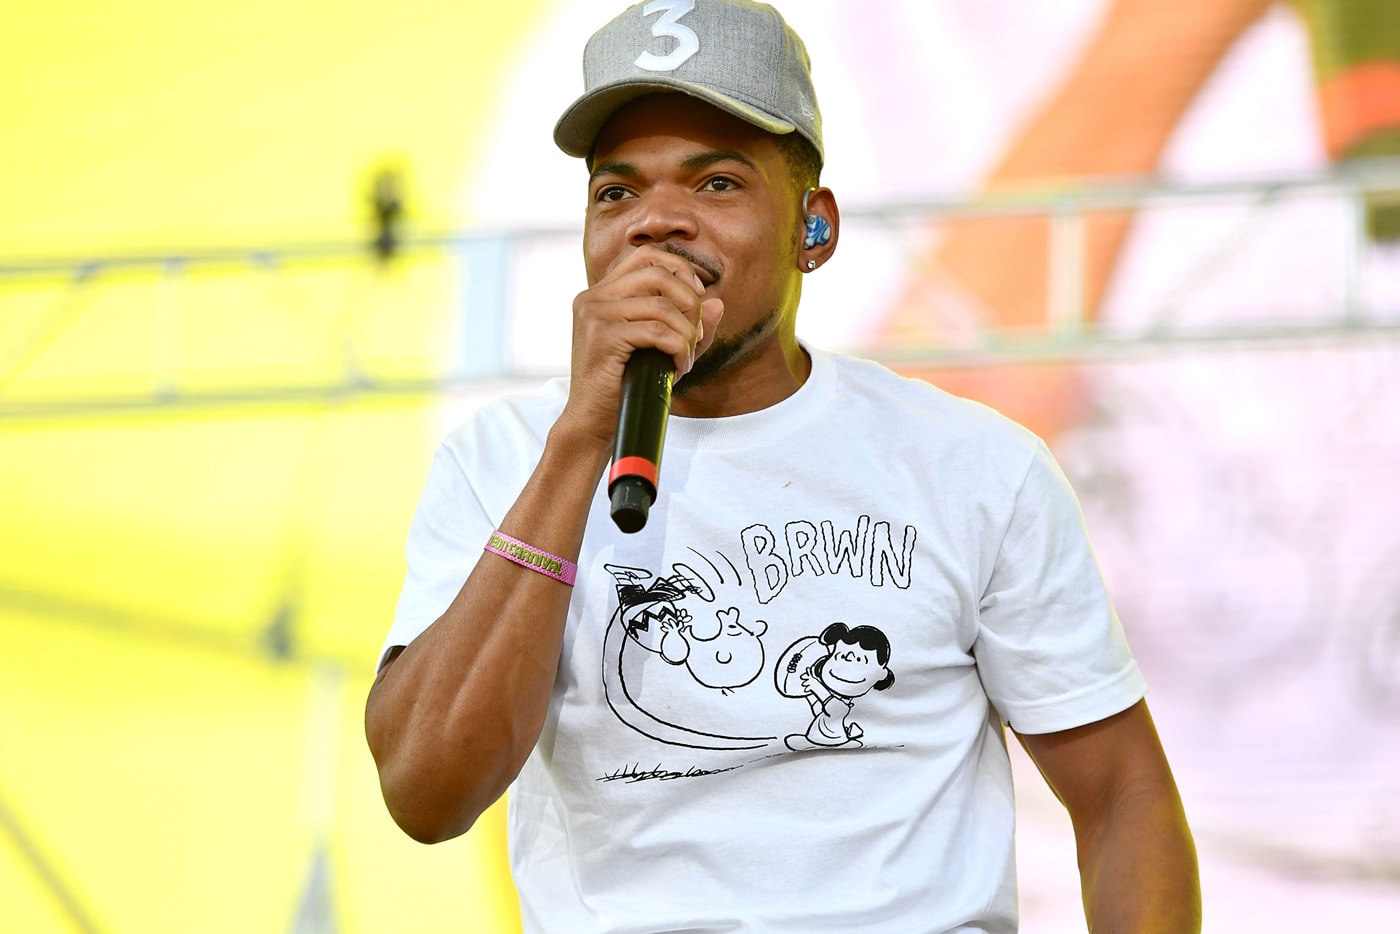 Chance the Rapper Thinks Jordan Peele’s 'Get Out' is the "Best Film" in a While